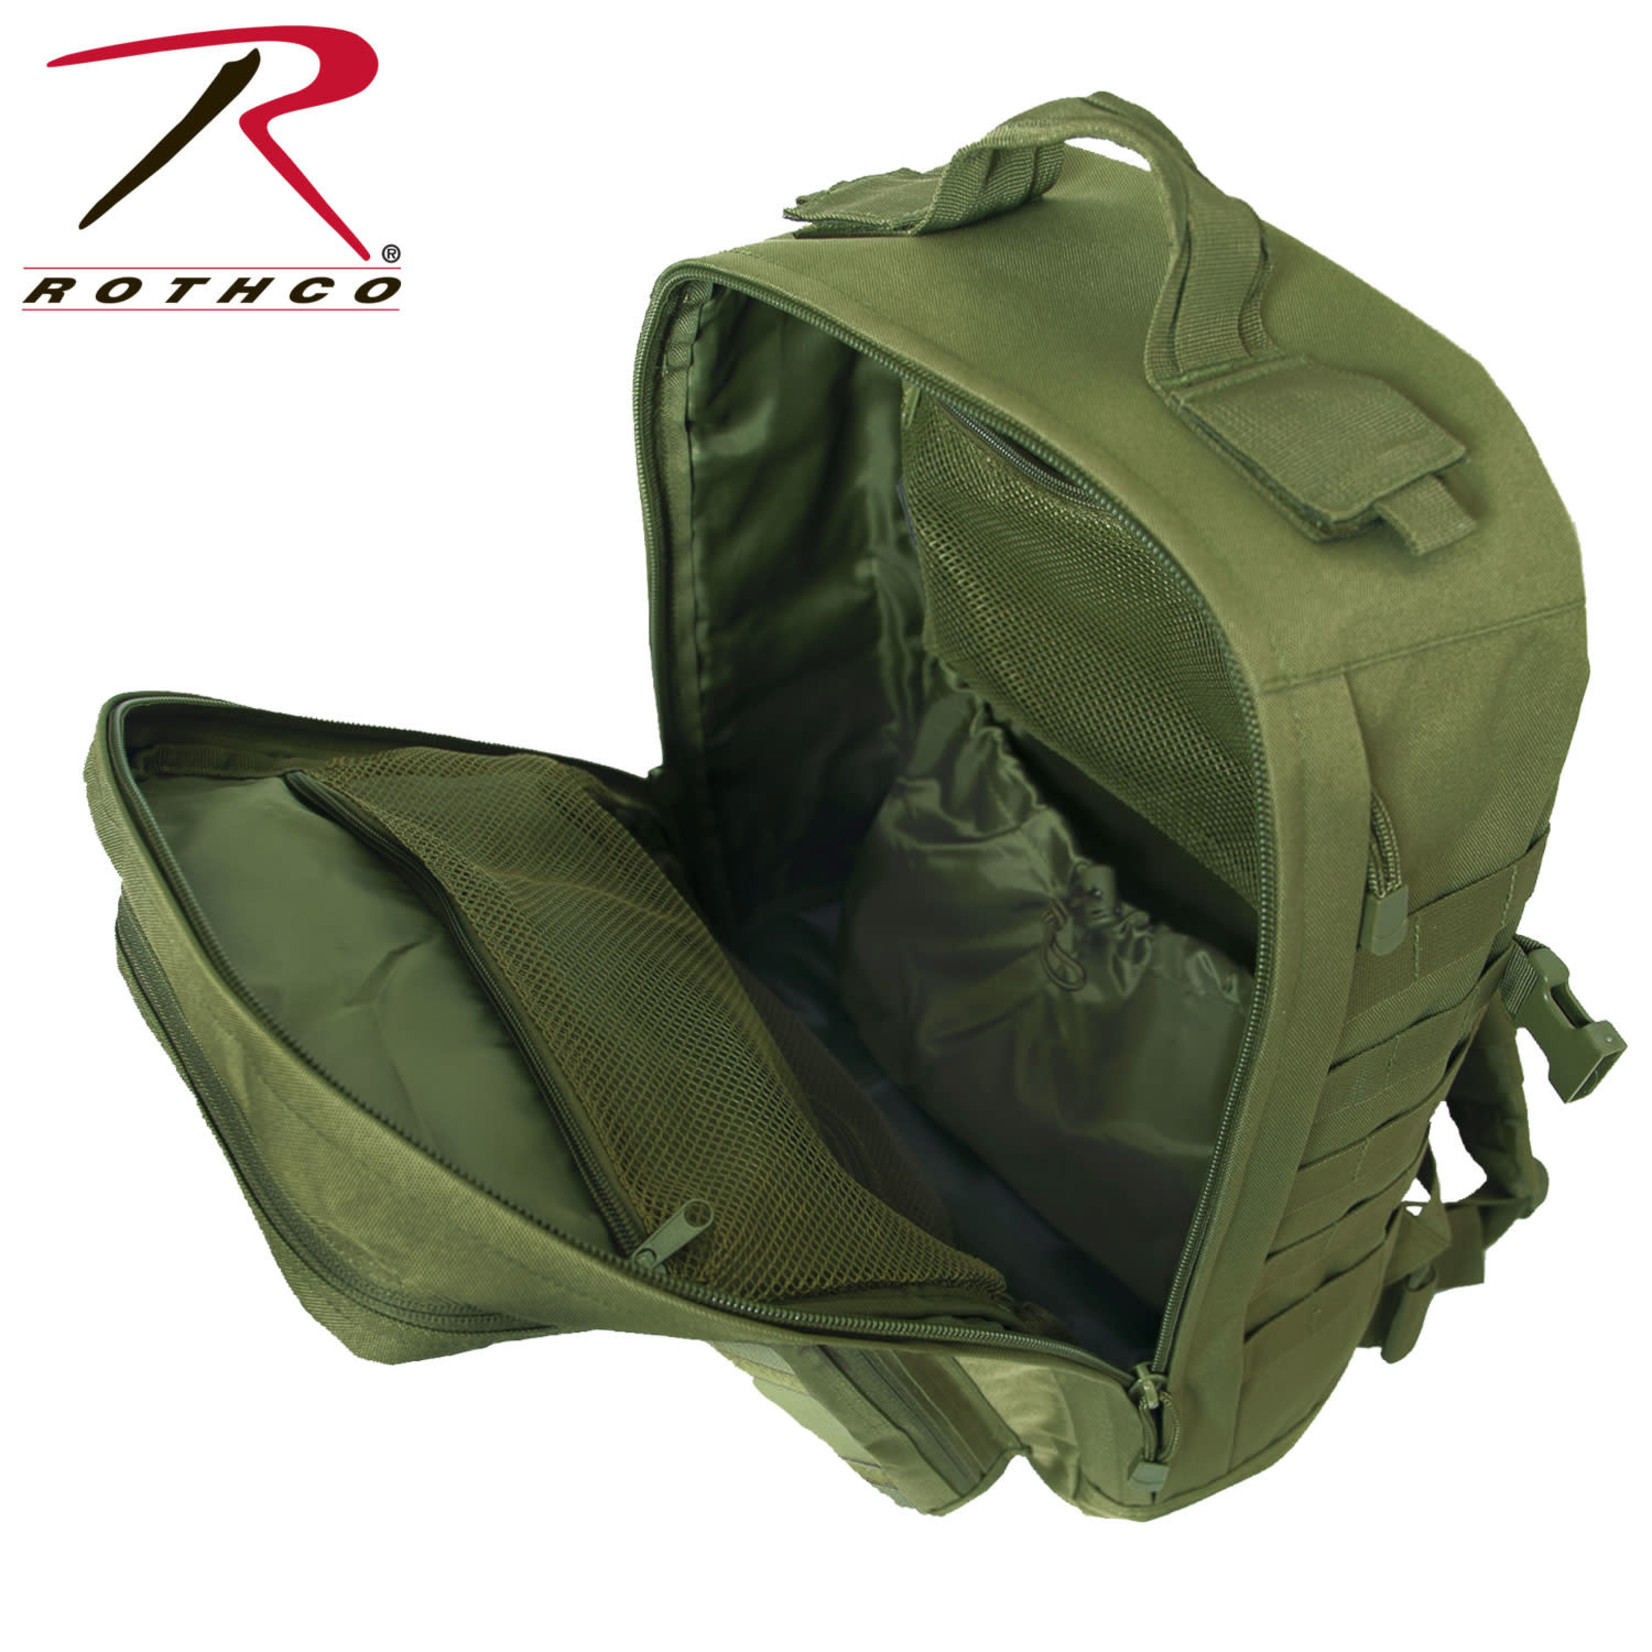 Rothco Rothco Fast Mover Tactical Backpack